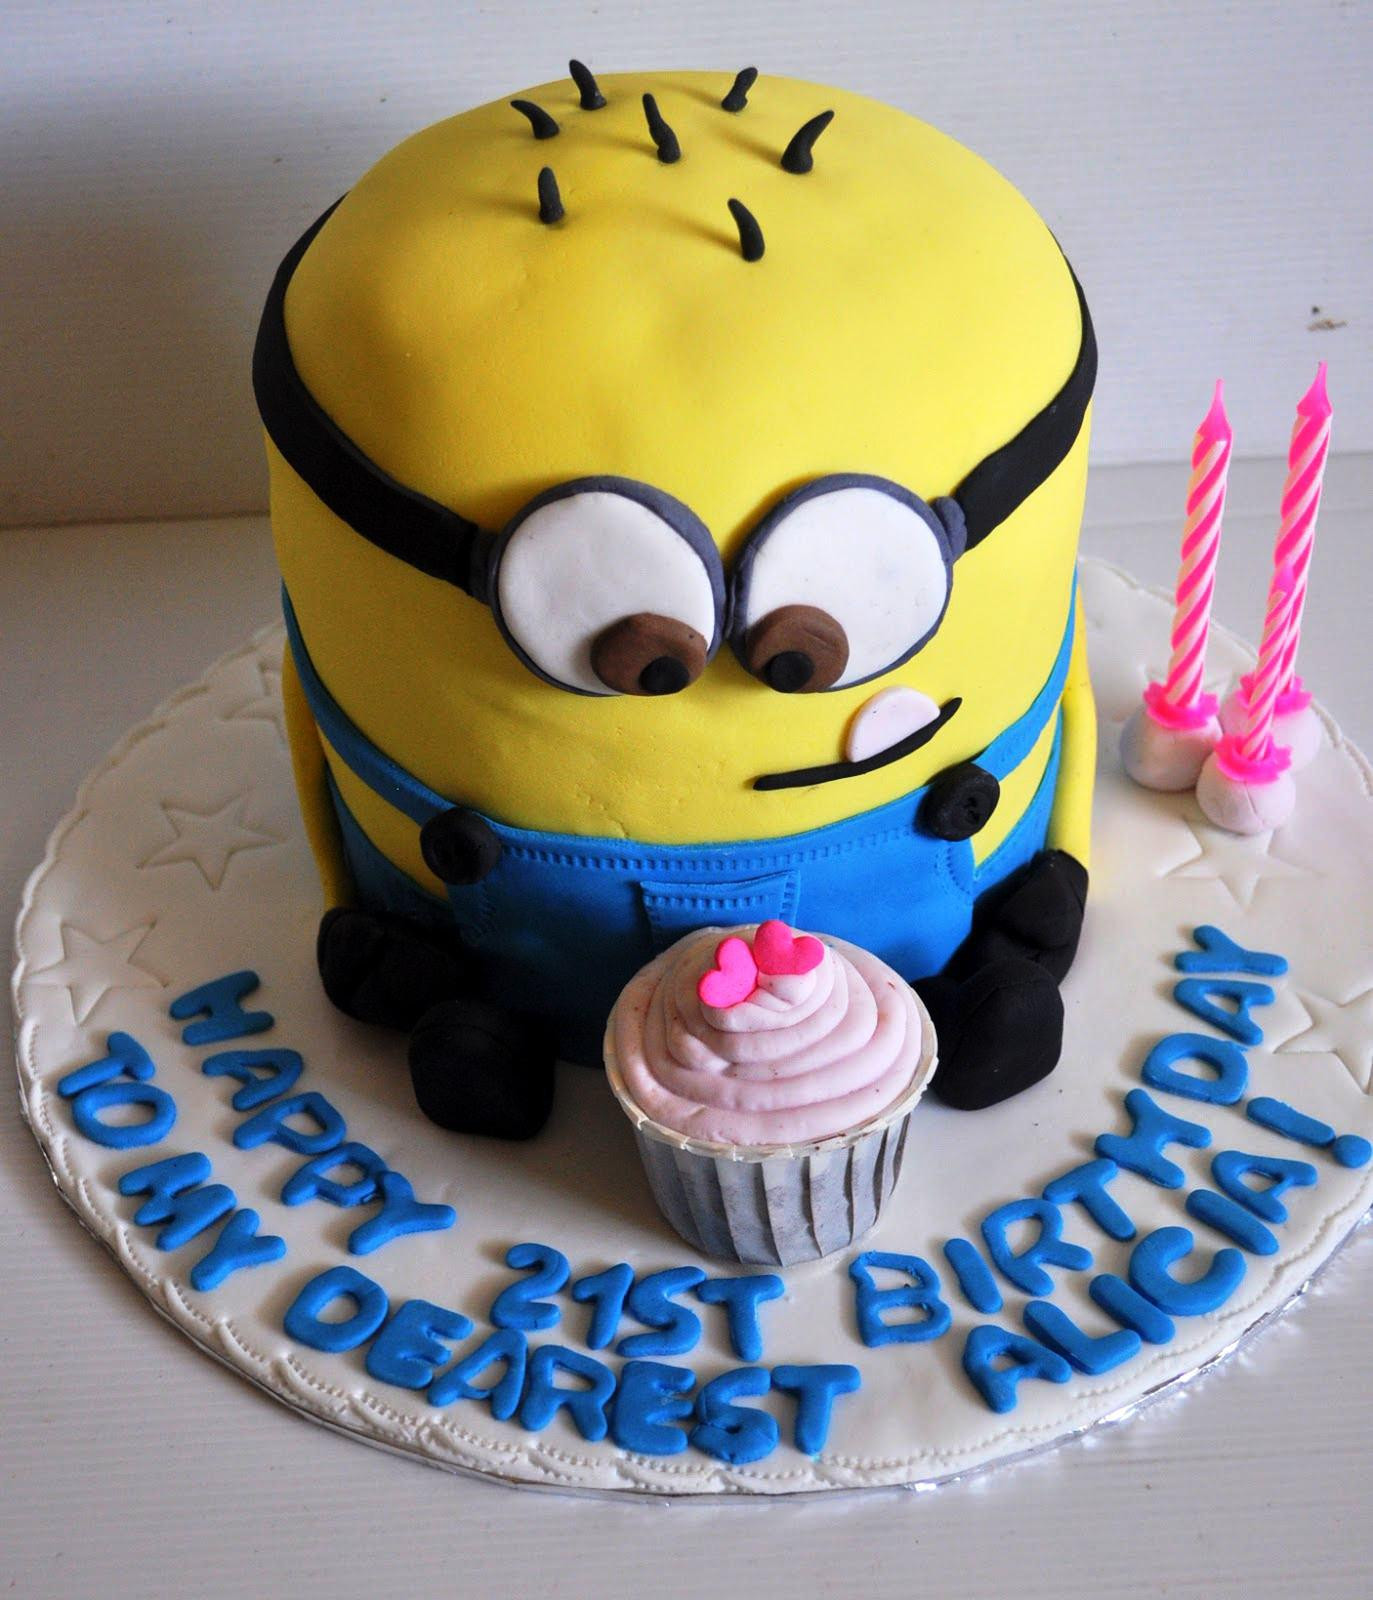 Pictures Of Funny Birthday Cakes
 29 Funny Cake And s